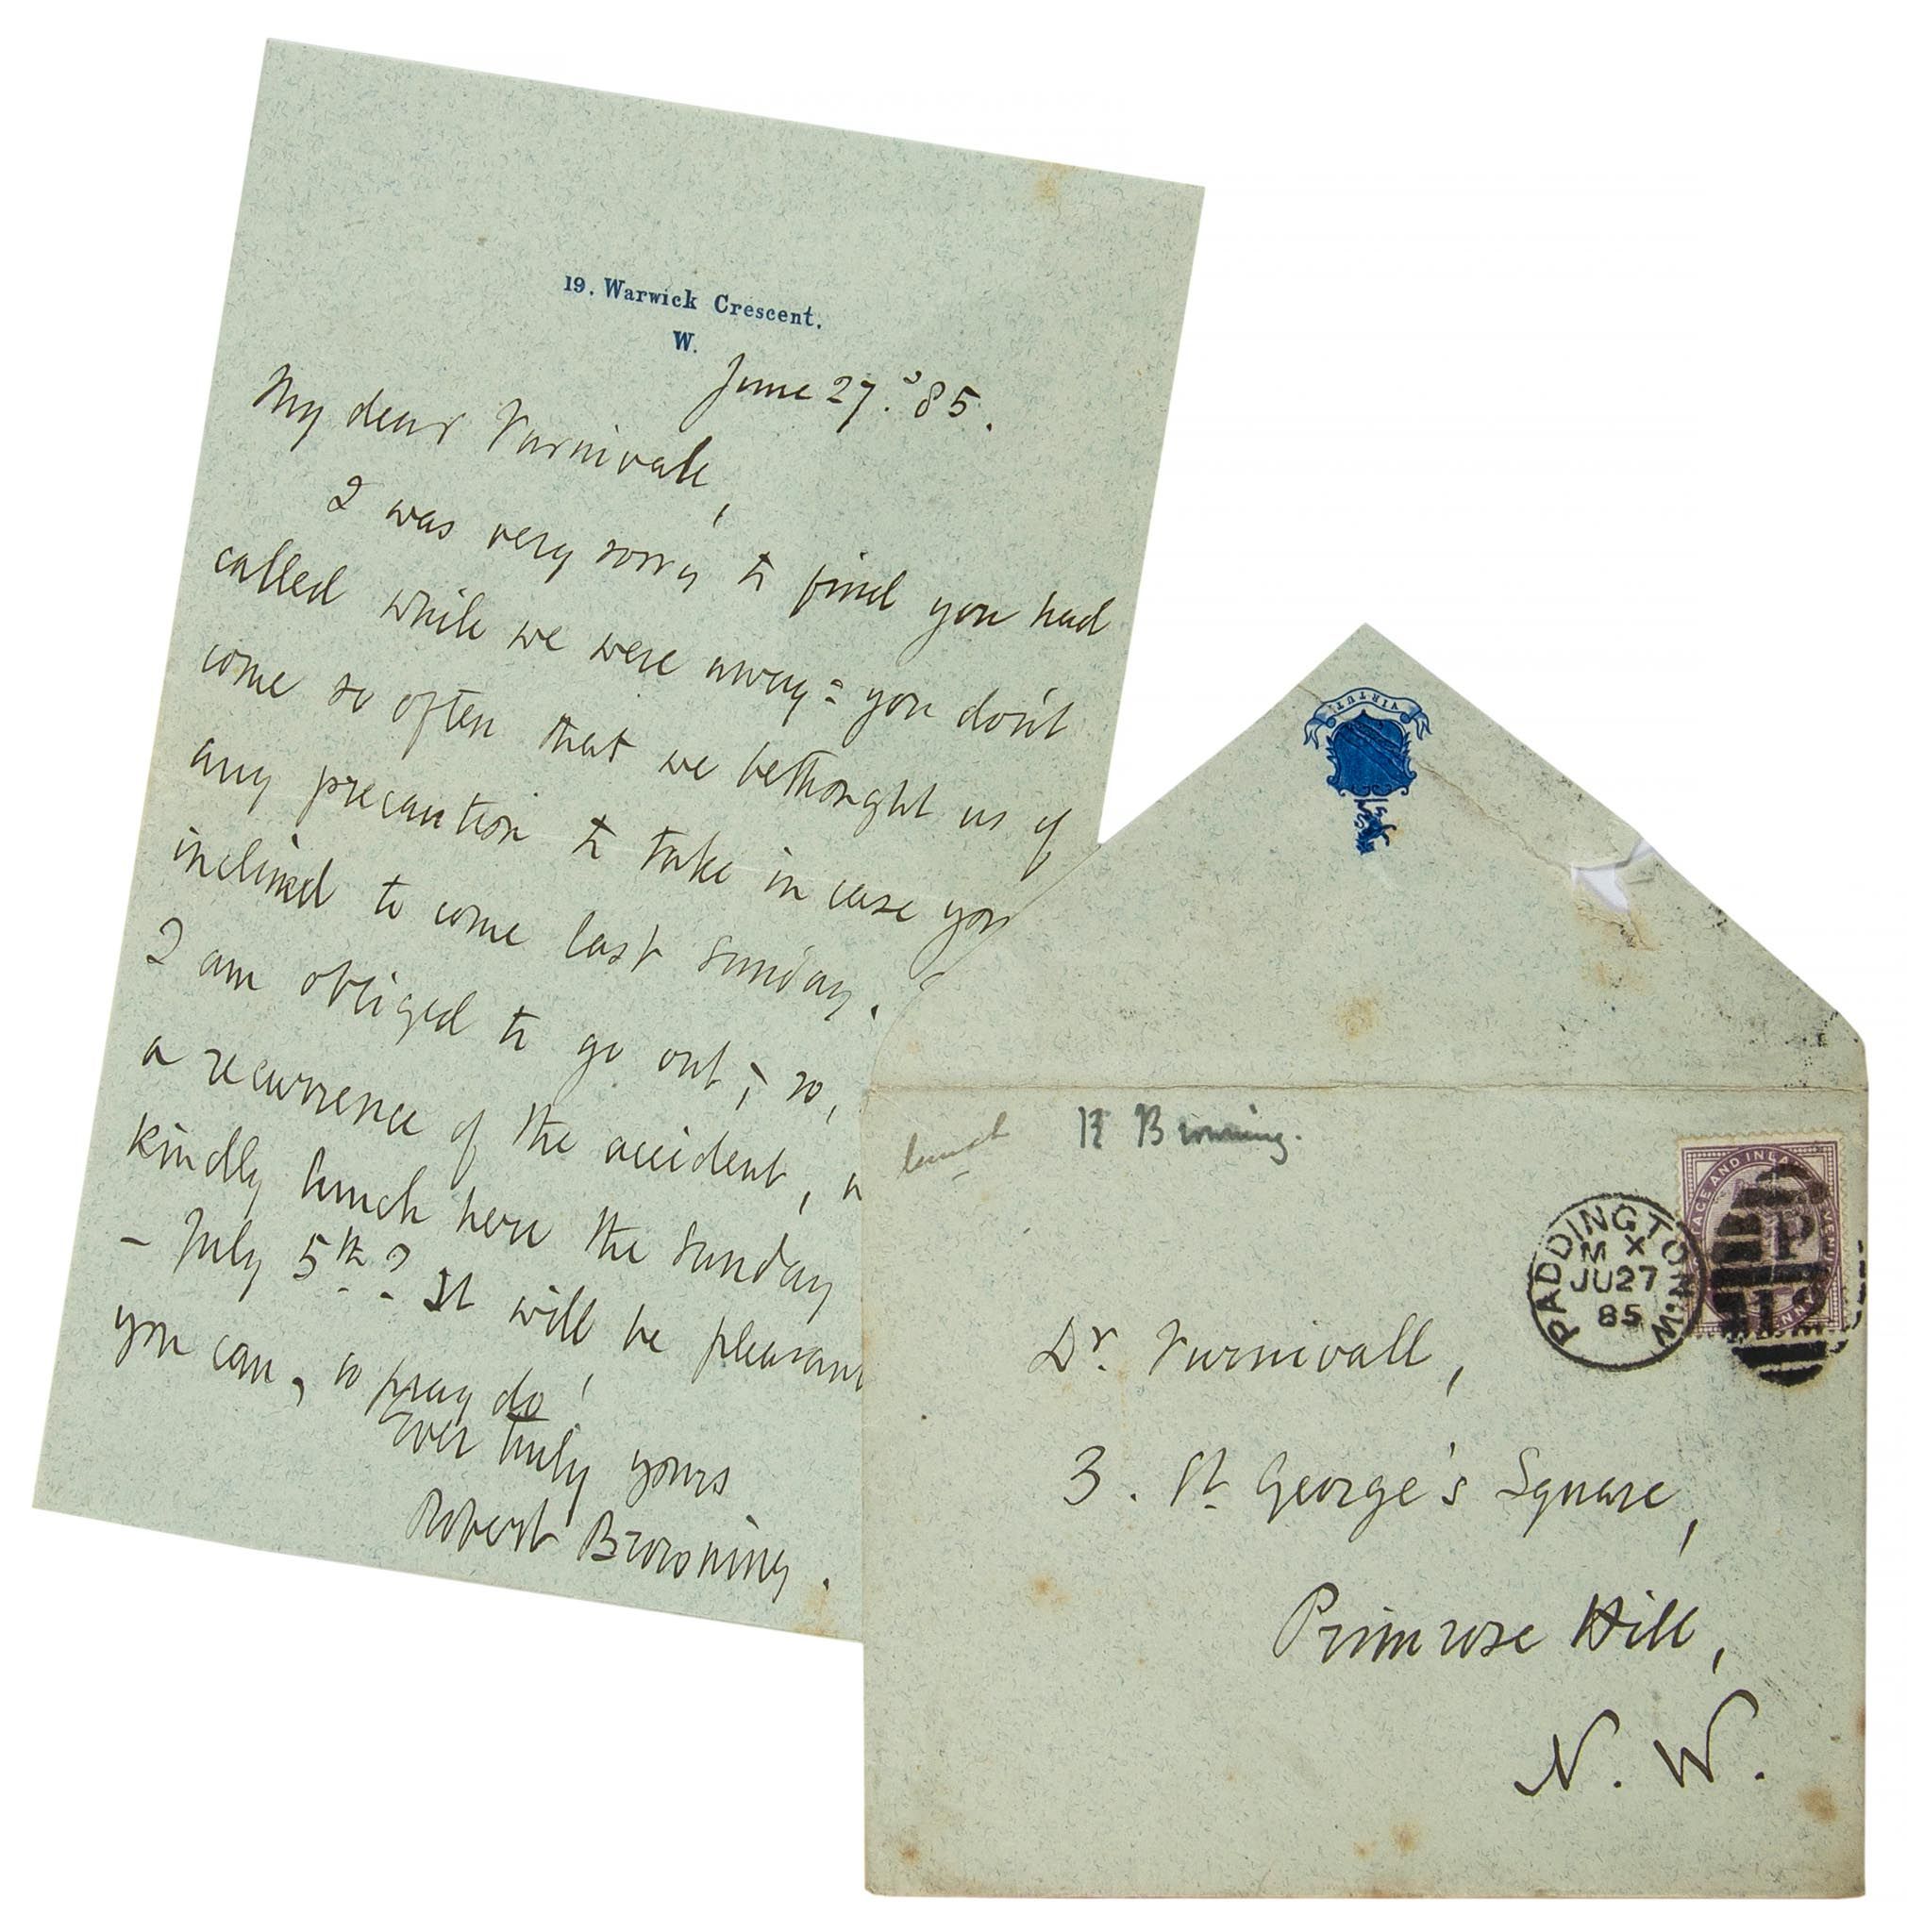 ALS A 17.5 x 11.5 cm letter from the poet Robert Browning to [Frederick... ALS A 17.5 x 11.5 cm